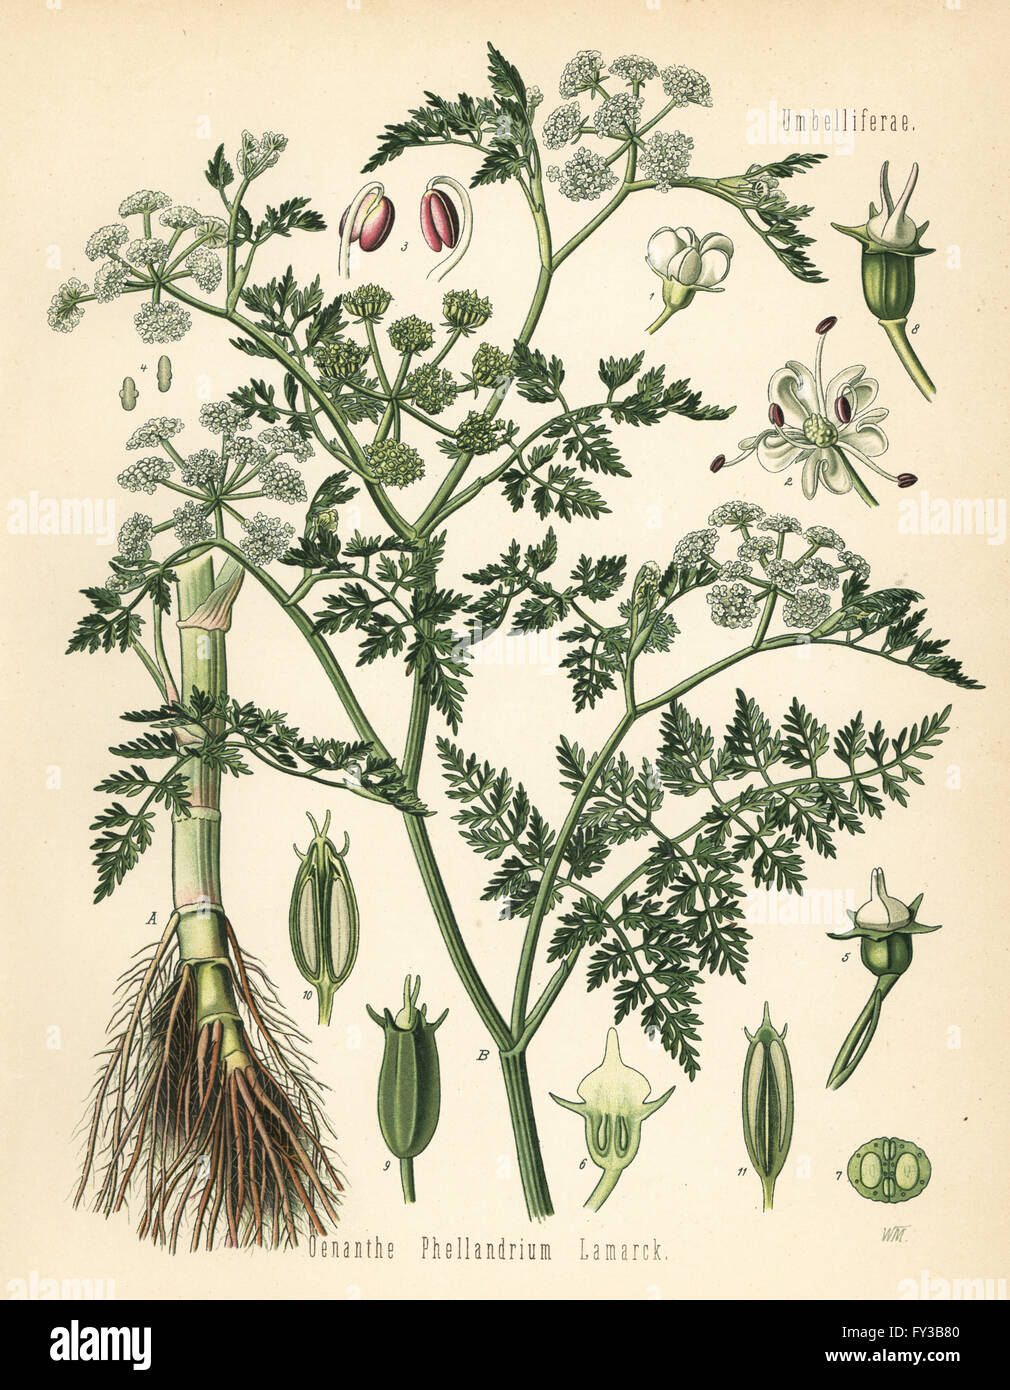 Fine-leafed water dropwort, Oenanthe aquatica (Oenanthe phellandrium). Chromolithograph after a botanical illustration by Walther Muller from Hermann Adolph Koehler's Medicinal Plants, edited by Gustav Pabst, Koehler, Germany, 1887. Stock Photo